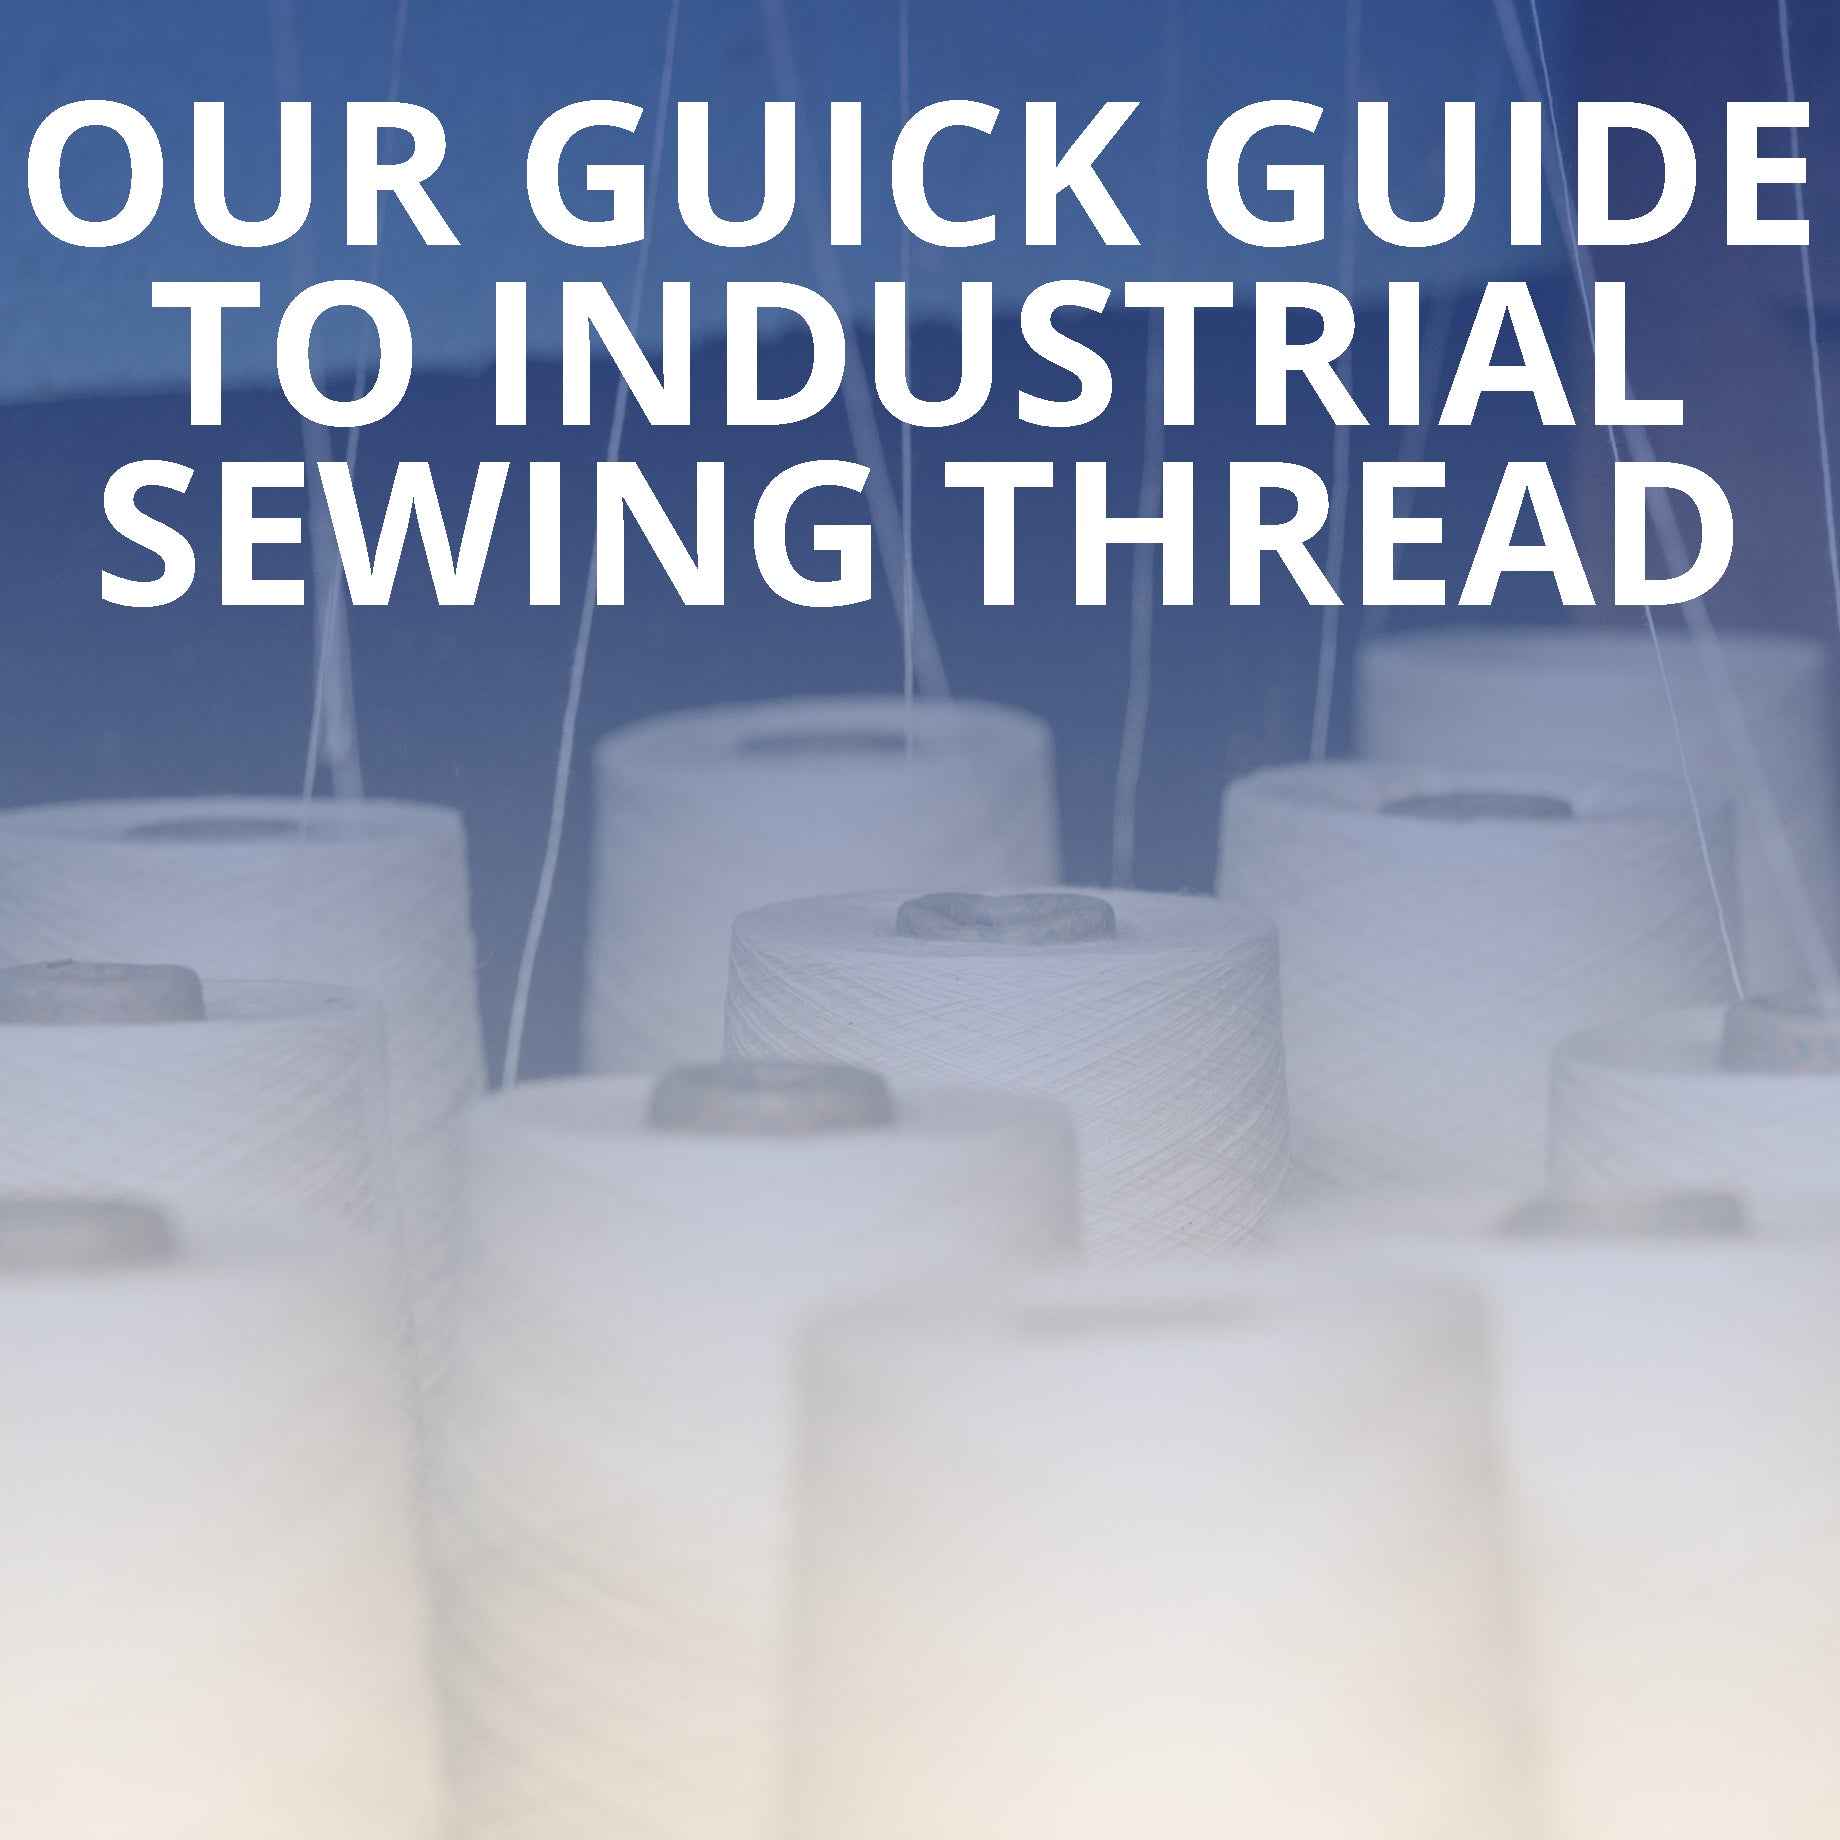 Our Quick Guide to Industrial Sewing Thread